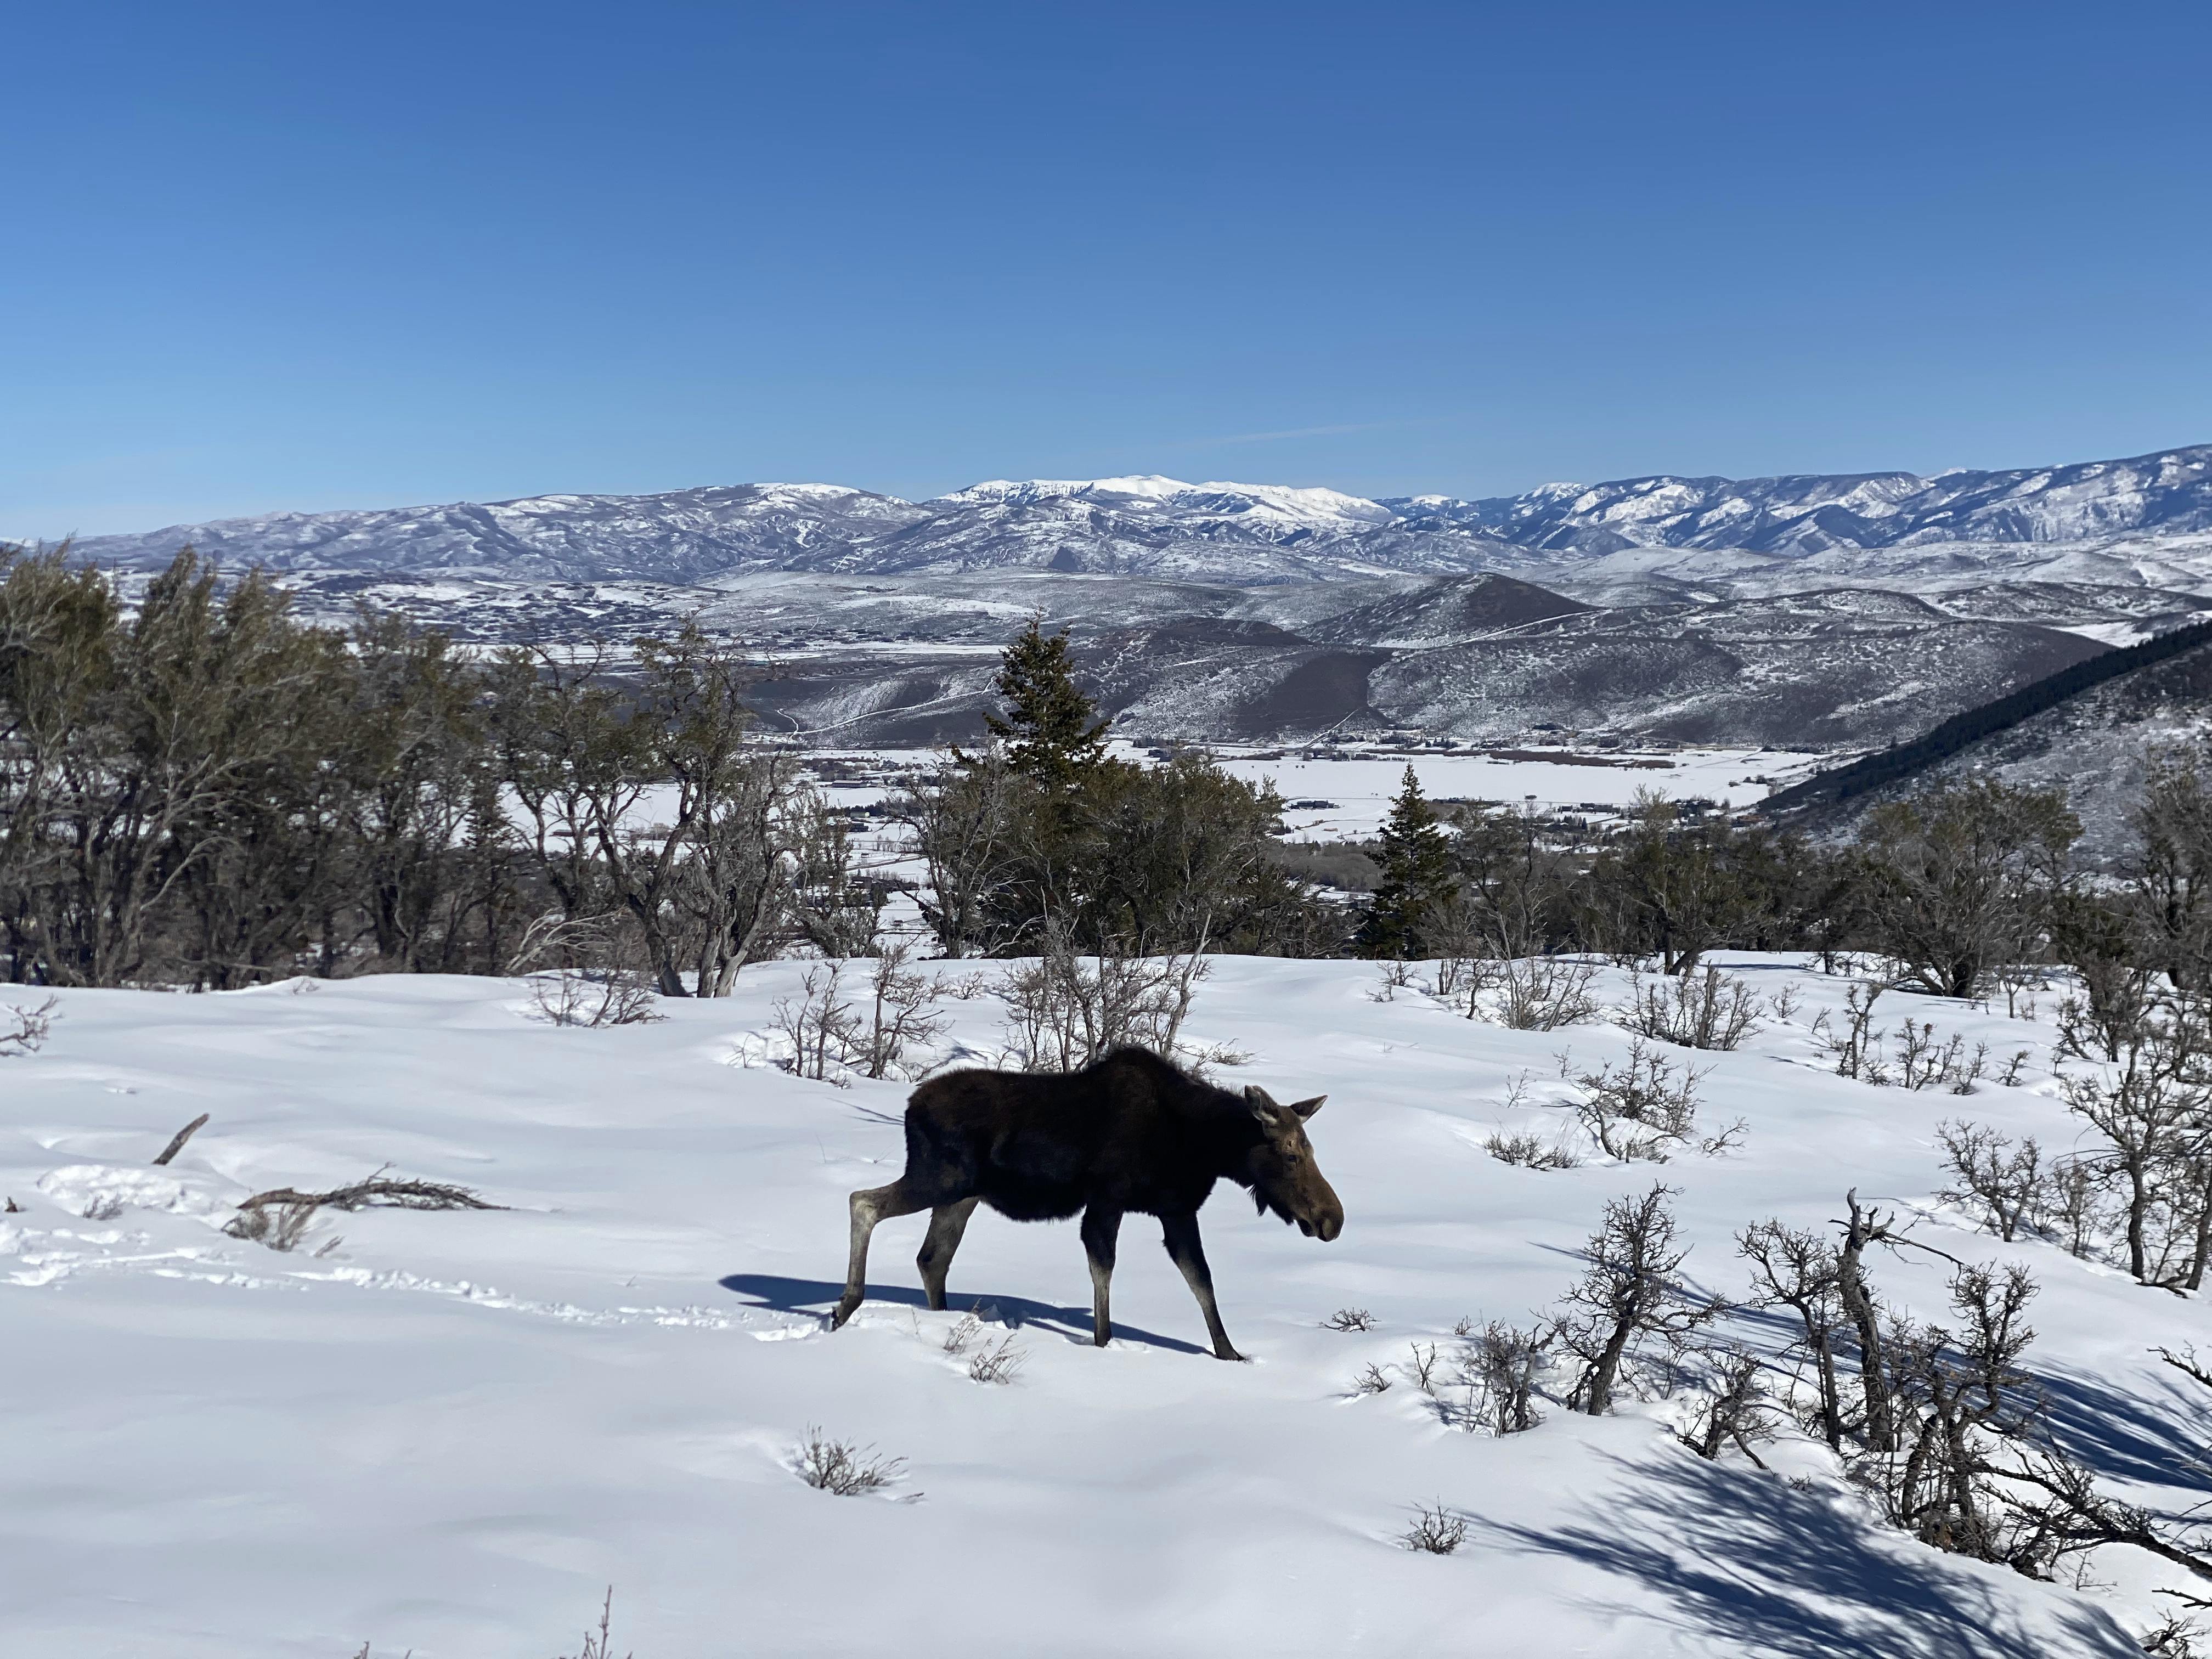 A moose walking around in the snow. There are snowy mountains in the background. 